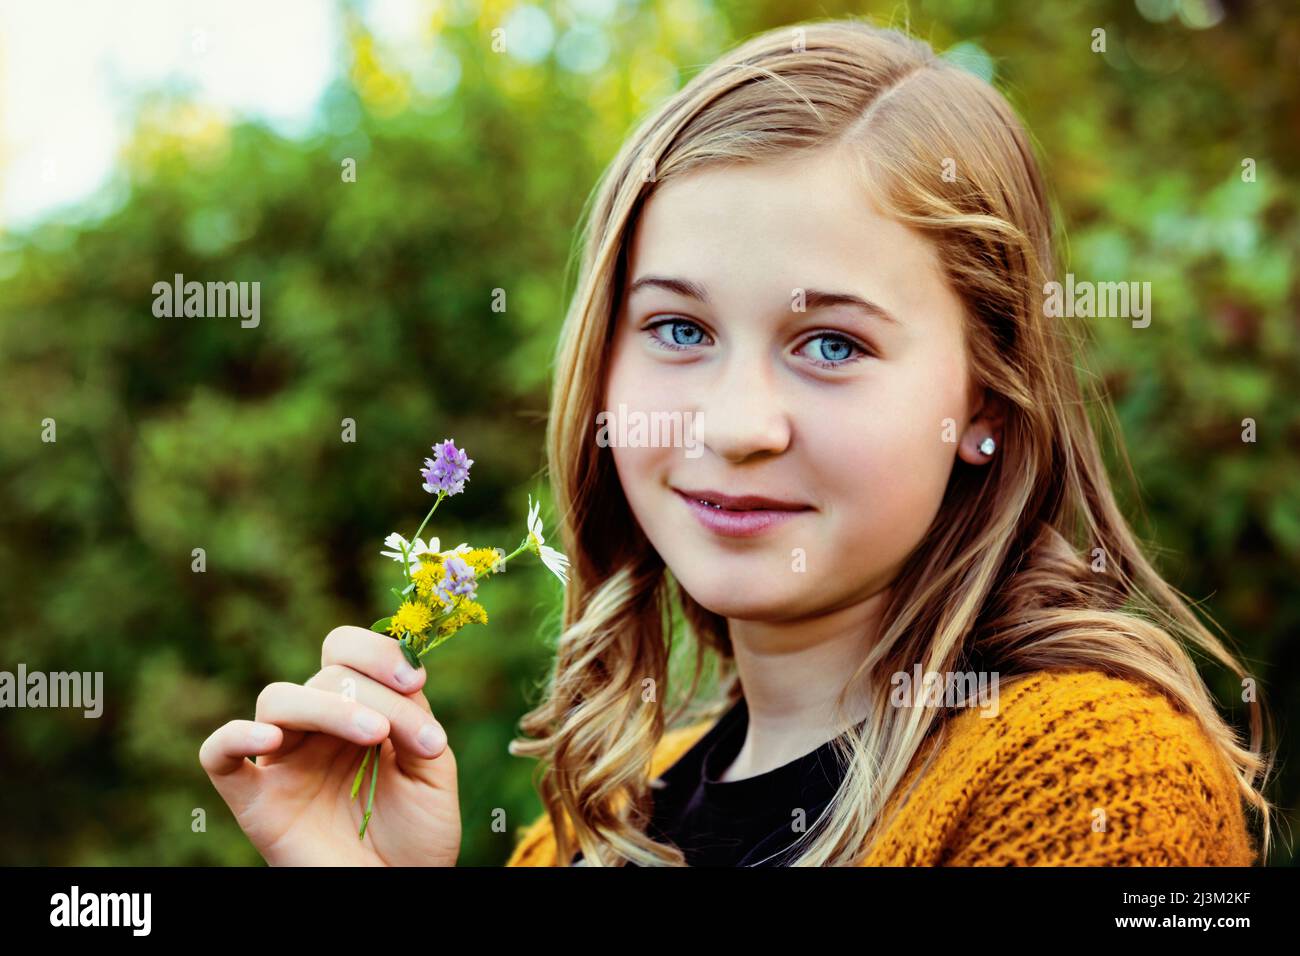 Teenage girl stands outdoors holding a small cluster of colourful wildflowers and looking at the camera; Edmonton, Alberta, Canada Stock Photo